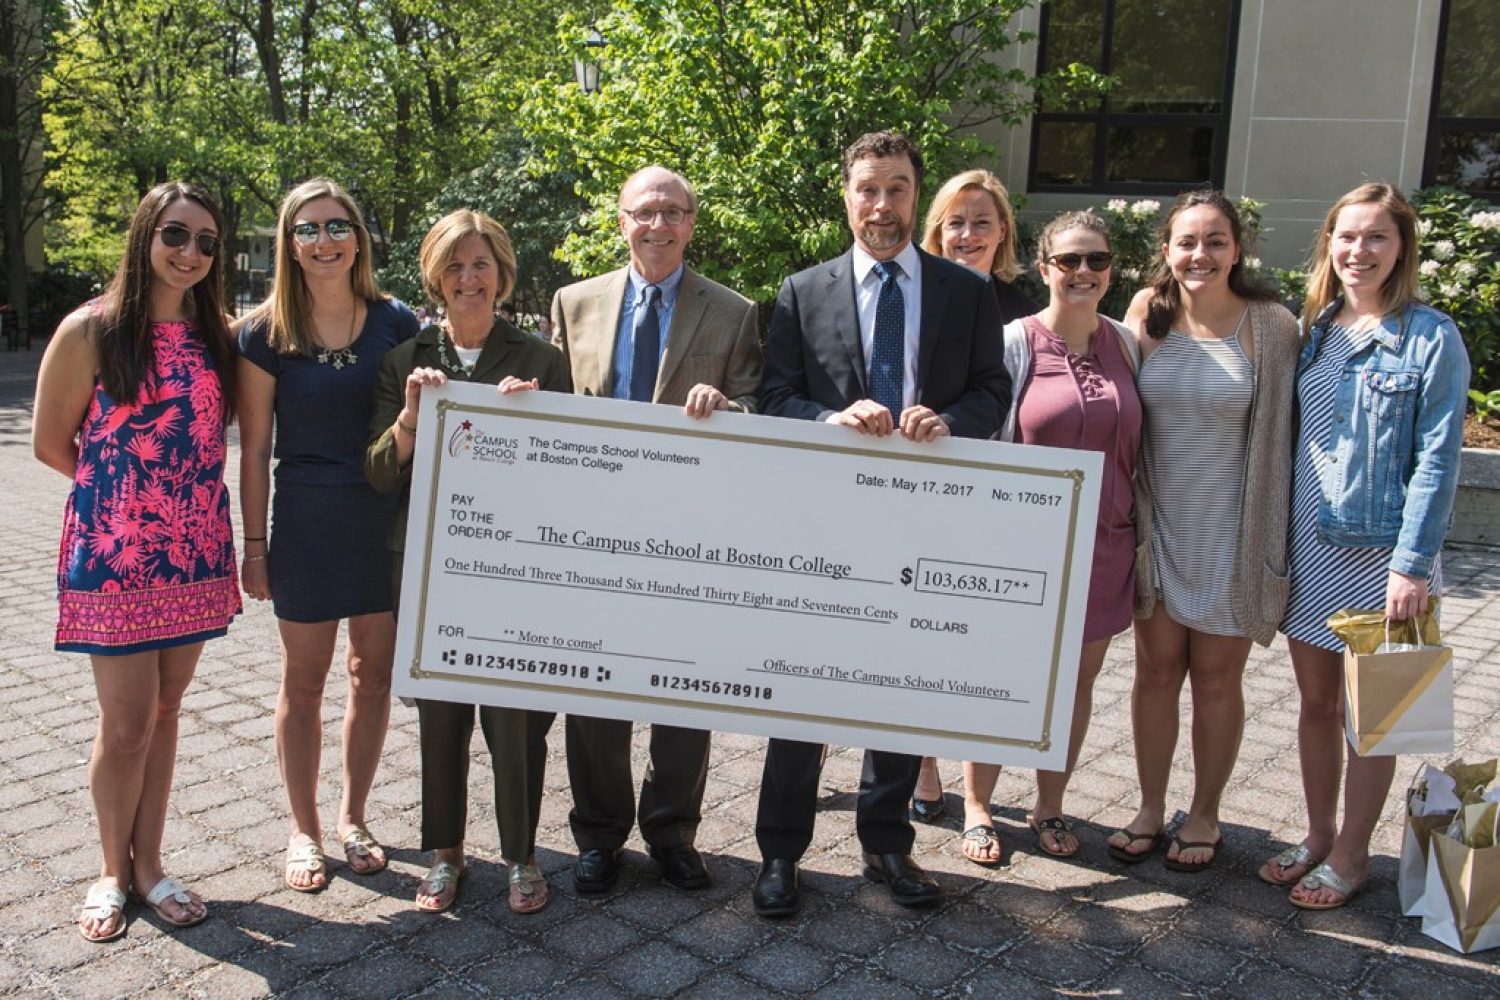 Students Raise $100,000 for the Campus School